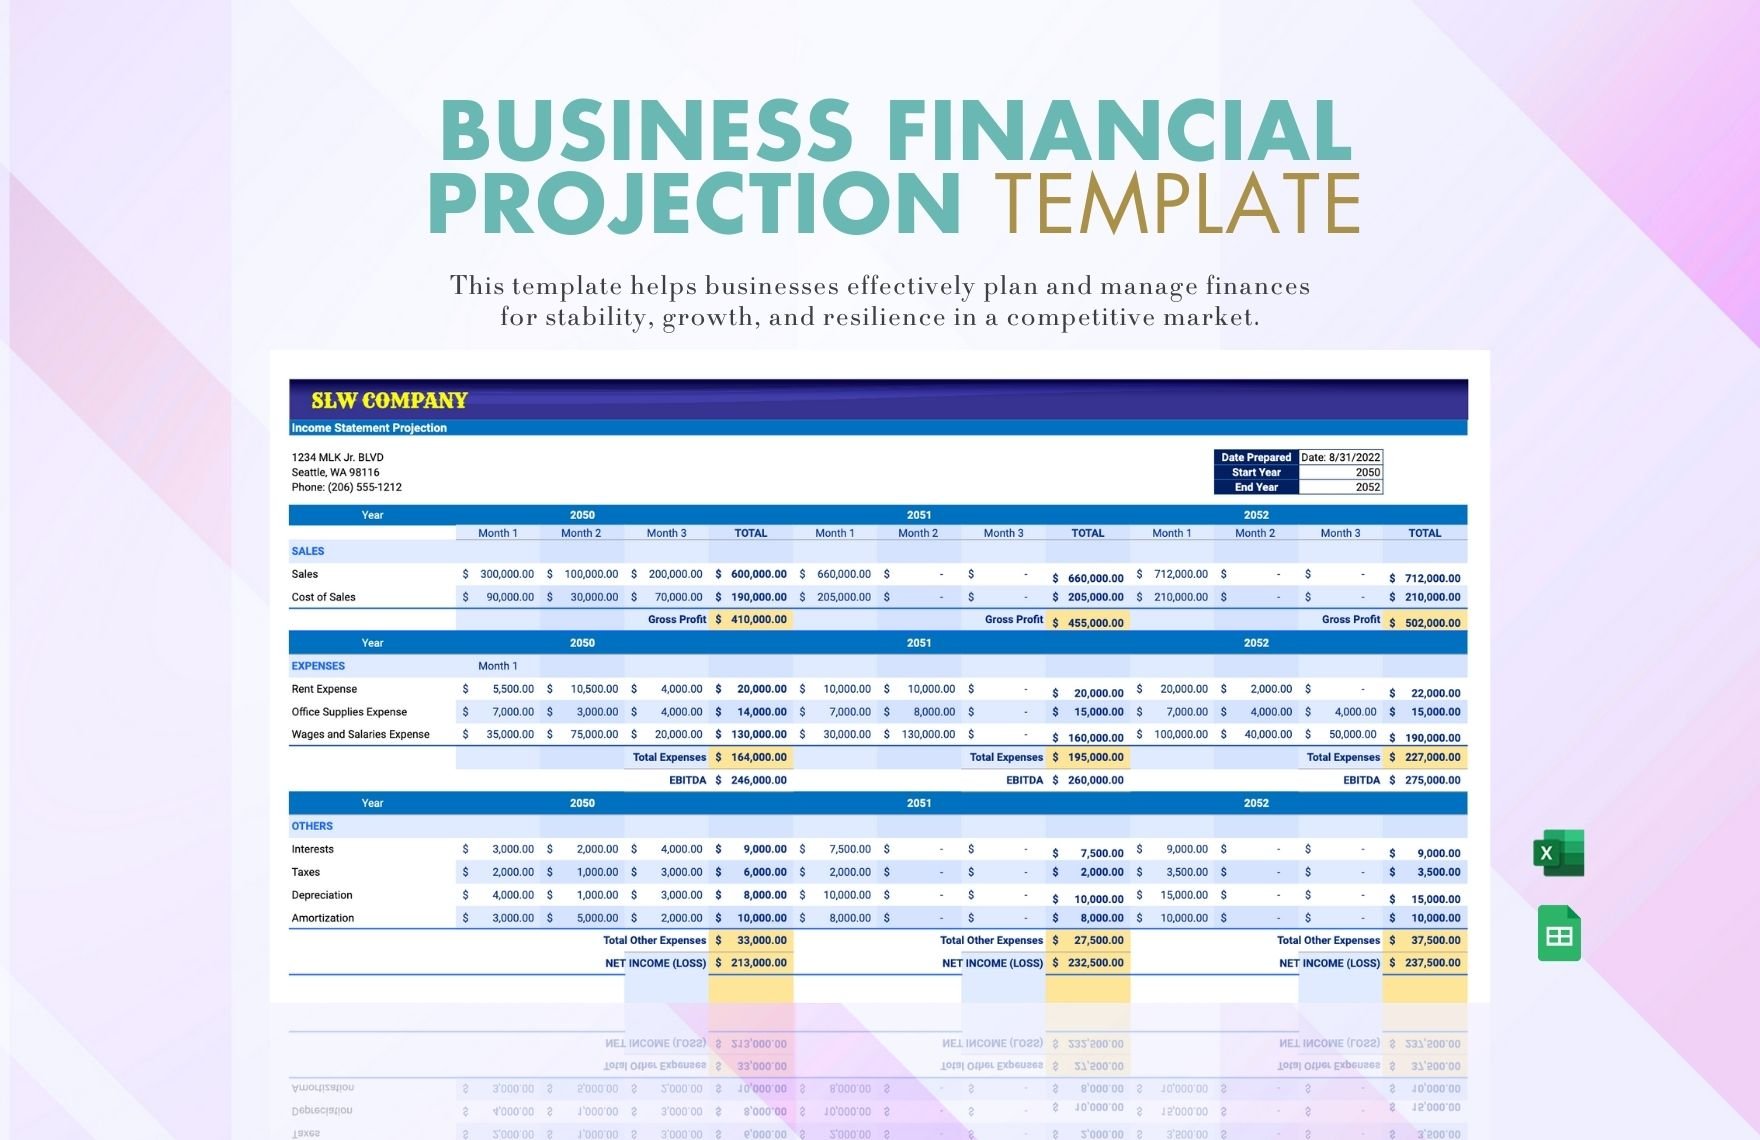 Business Financial Projection Template in Excel, Google Sheets